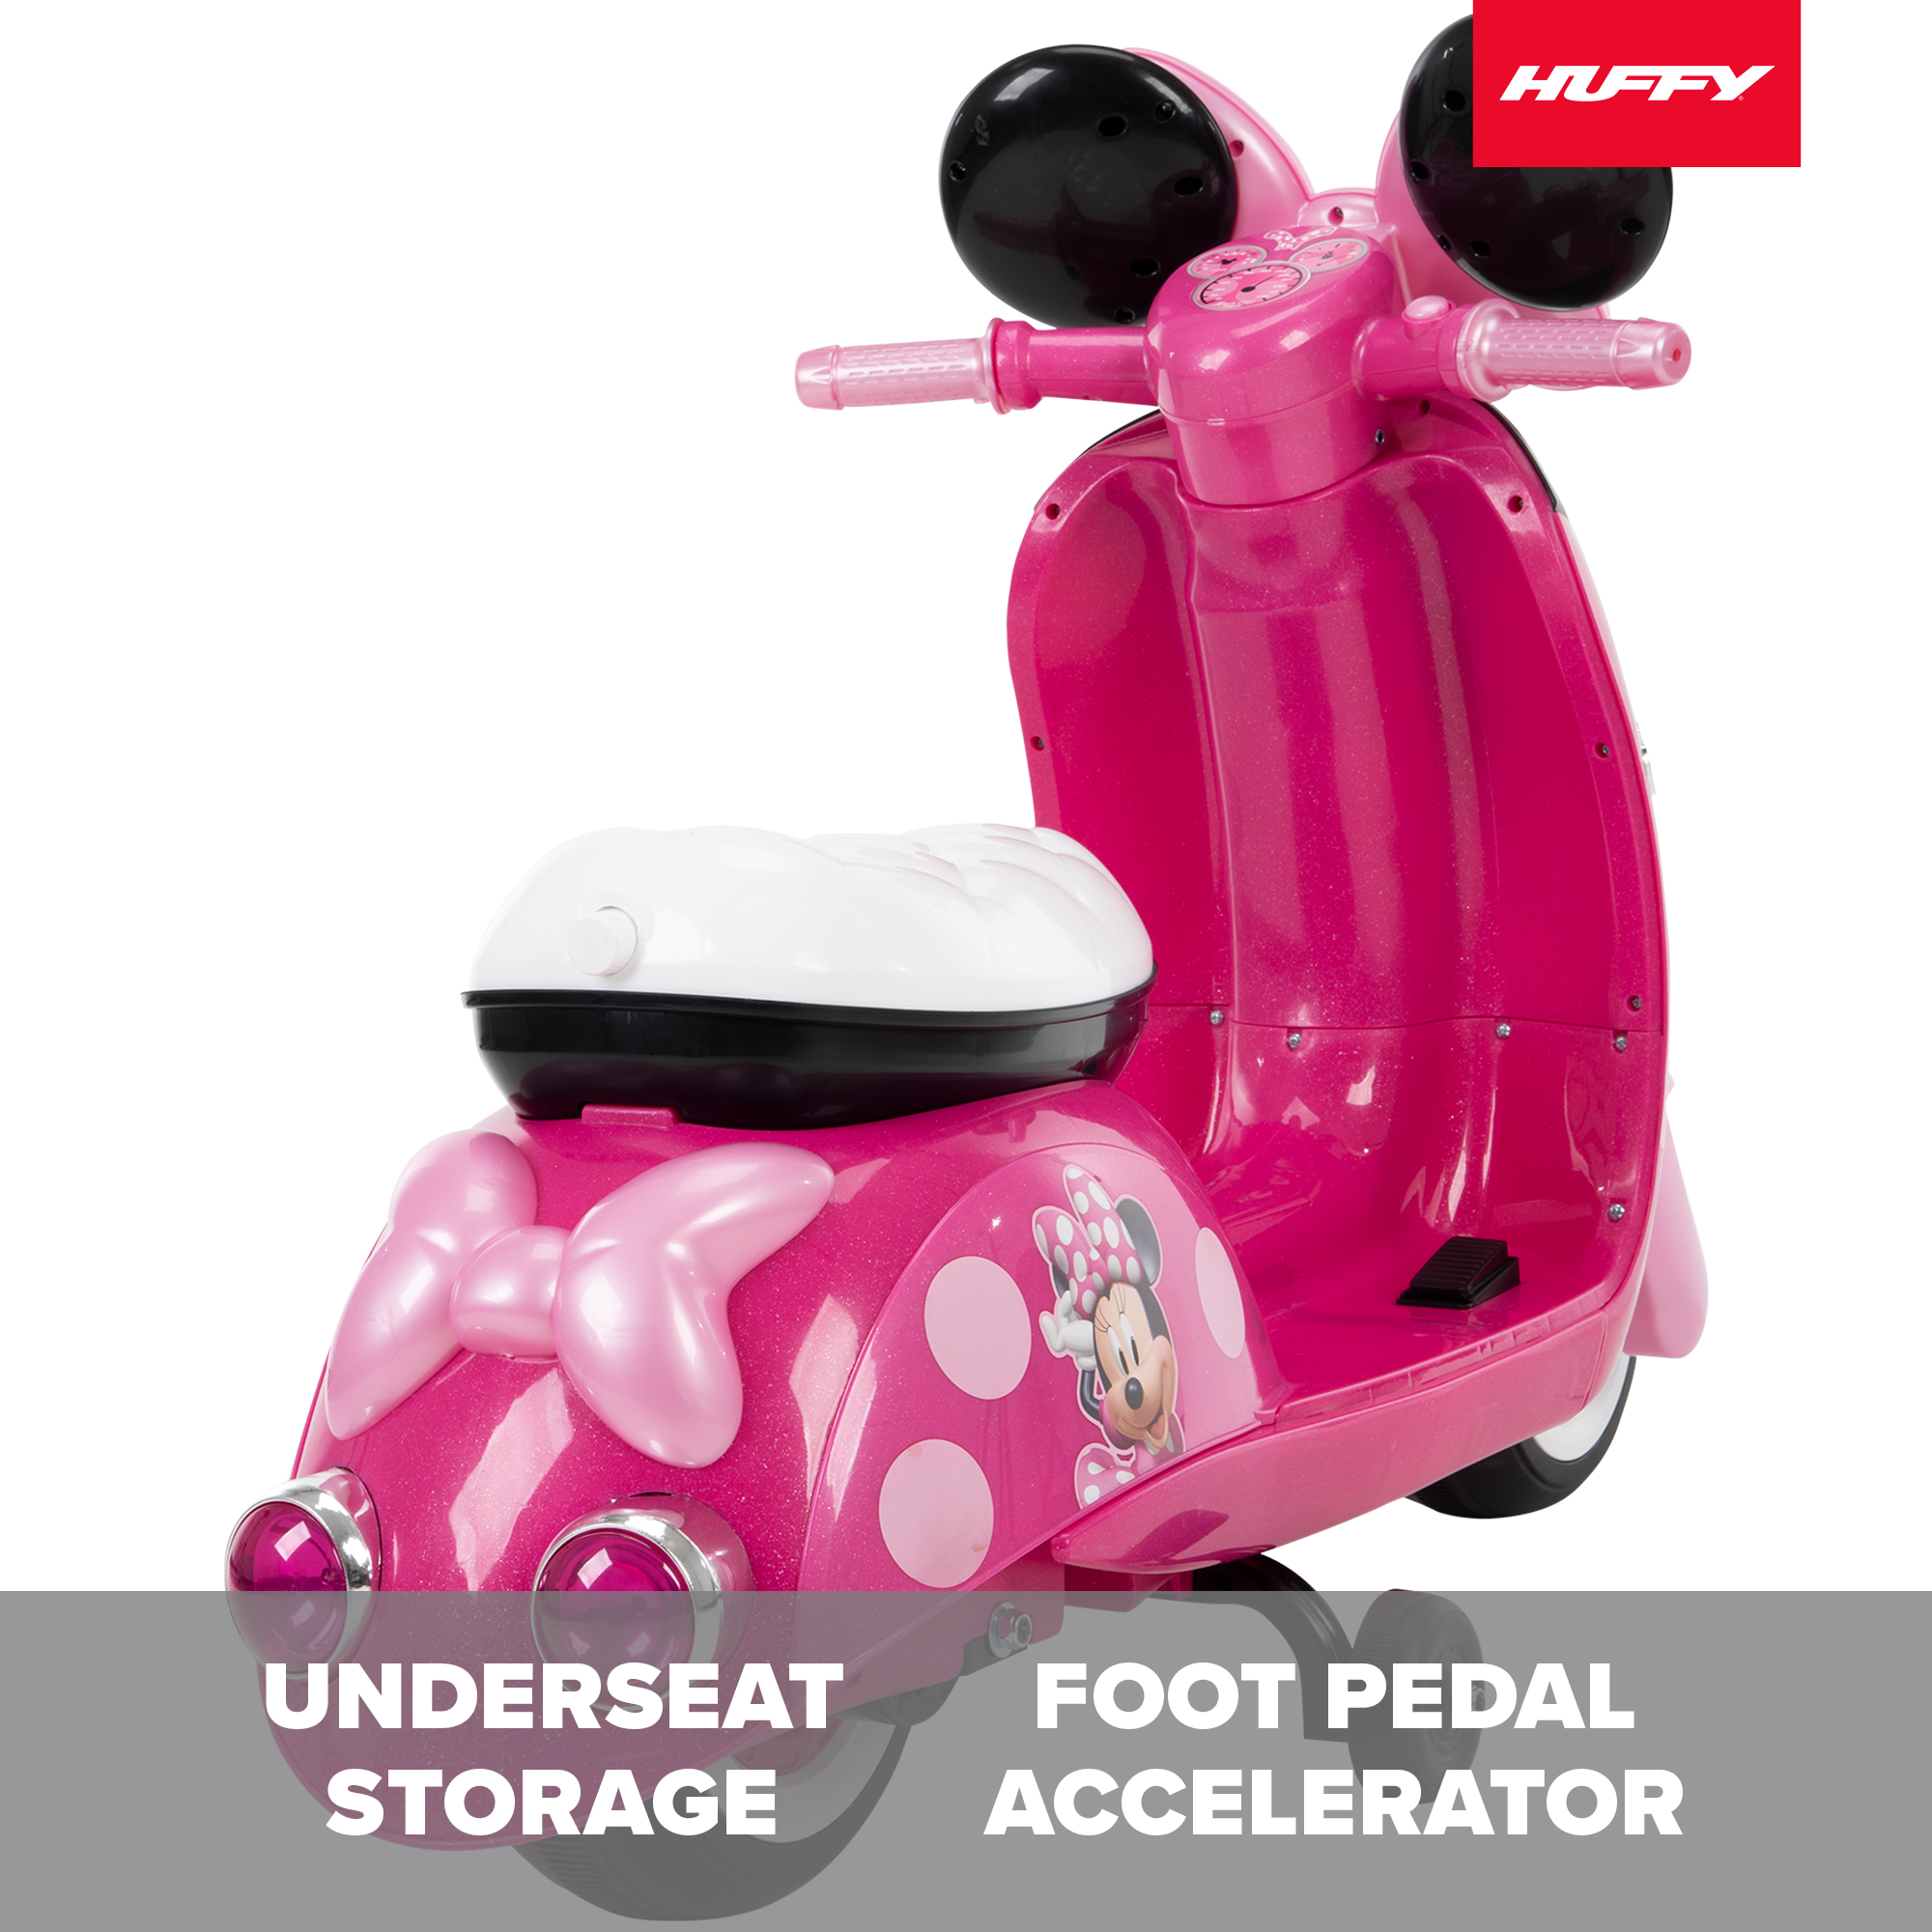 Disney Minnie Mouse 6V Euro Scooter Ride-on Battery-Powered Toy for Girls, Ages 1.5+ Years, by Huffy - image 3 of 14